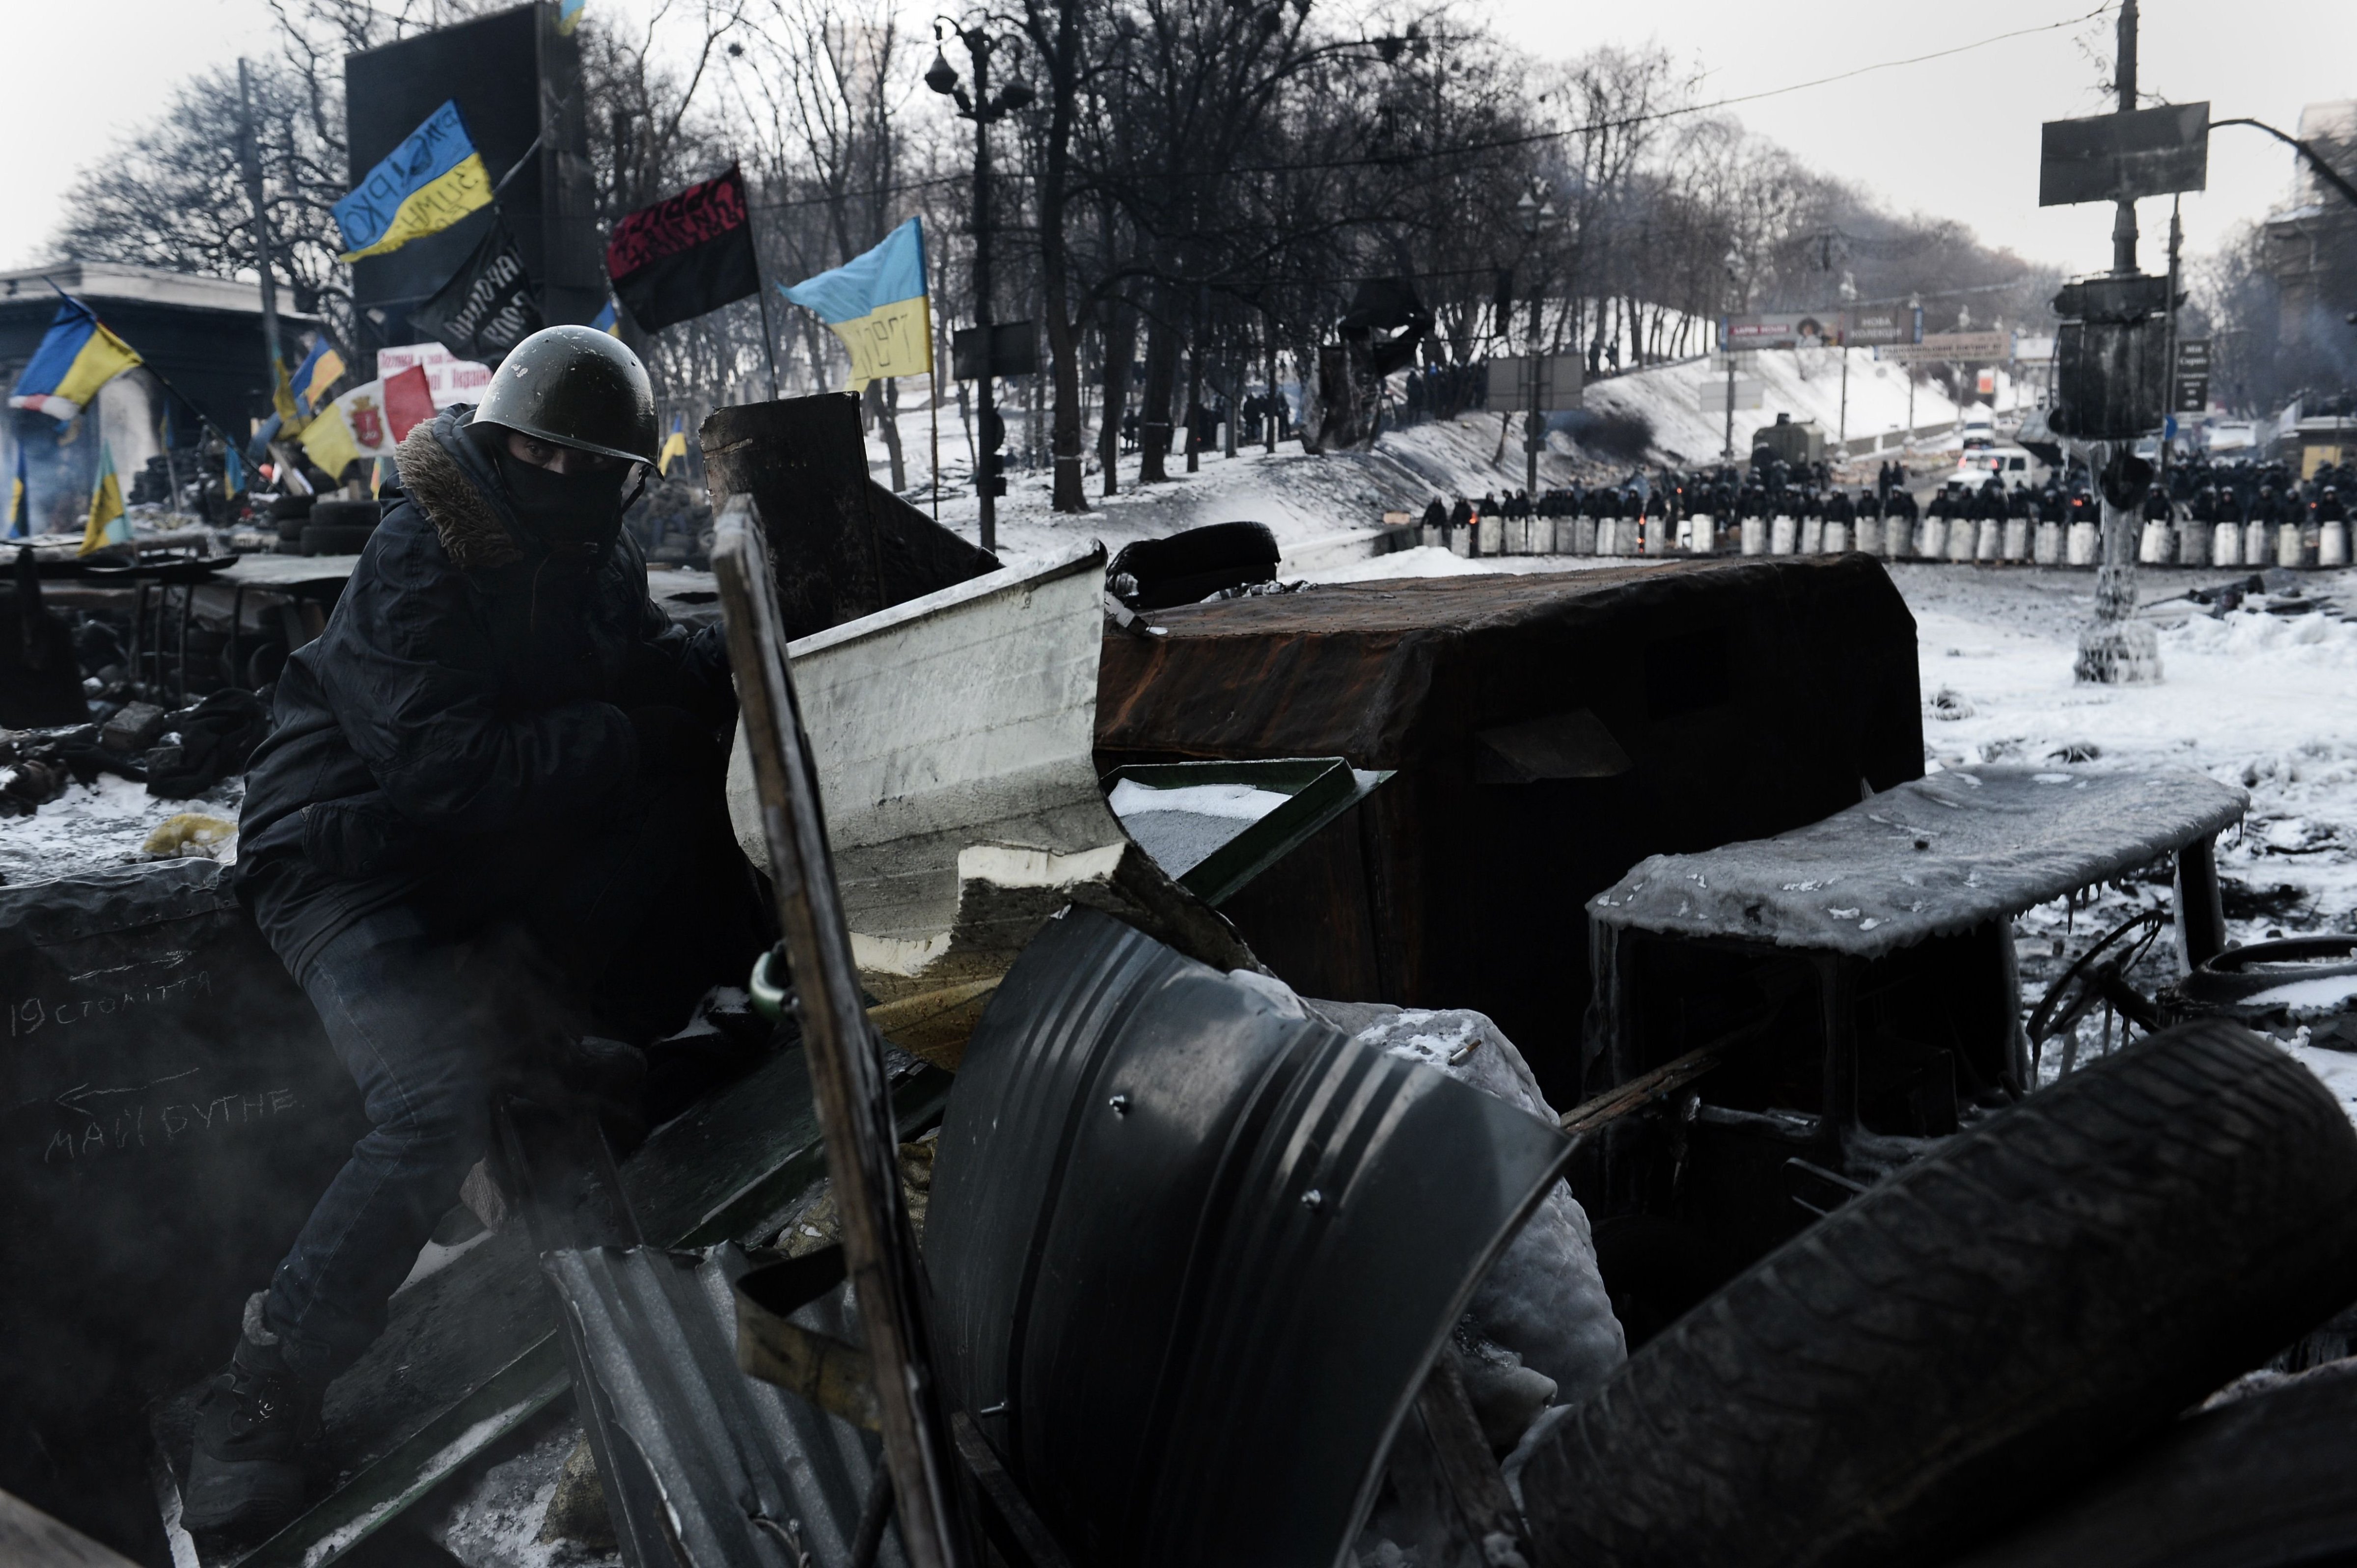 An anti-government protester sits at a road block in Kiev on Feb. 1, 2014. (Aris Messinis / AFP / Getty Images)